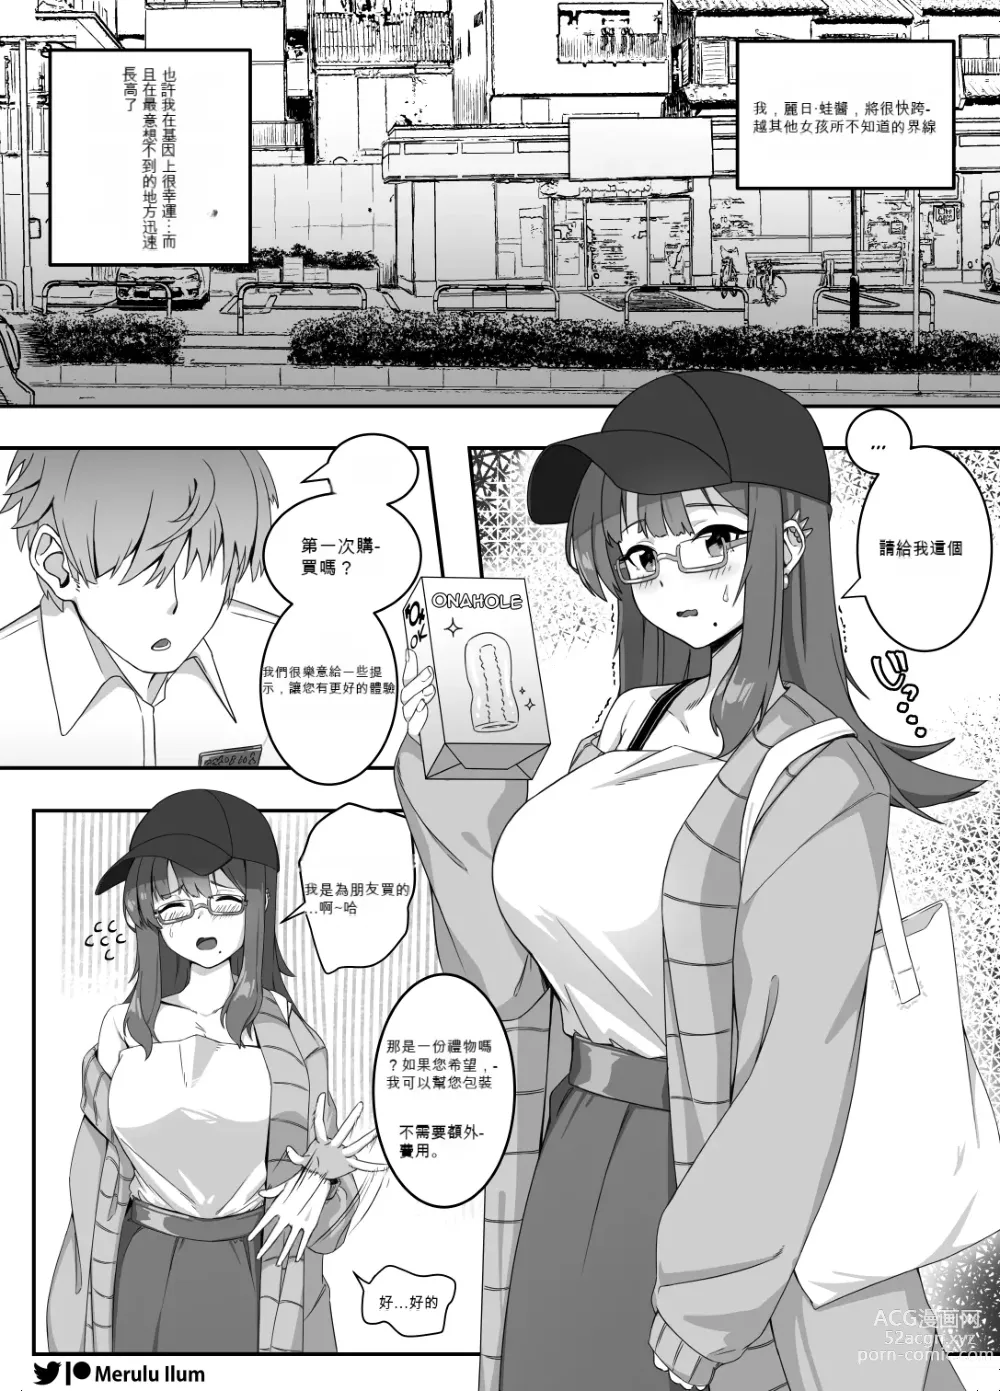 Page 2 of doujinshi Masturbation with a Giant Dick, Lets have fun!